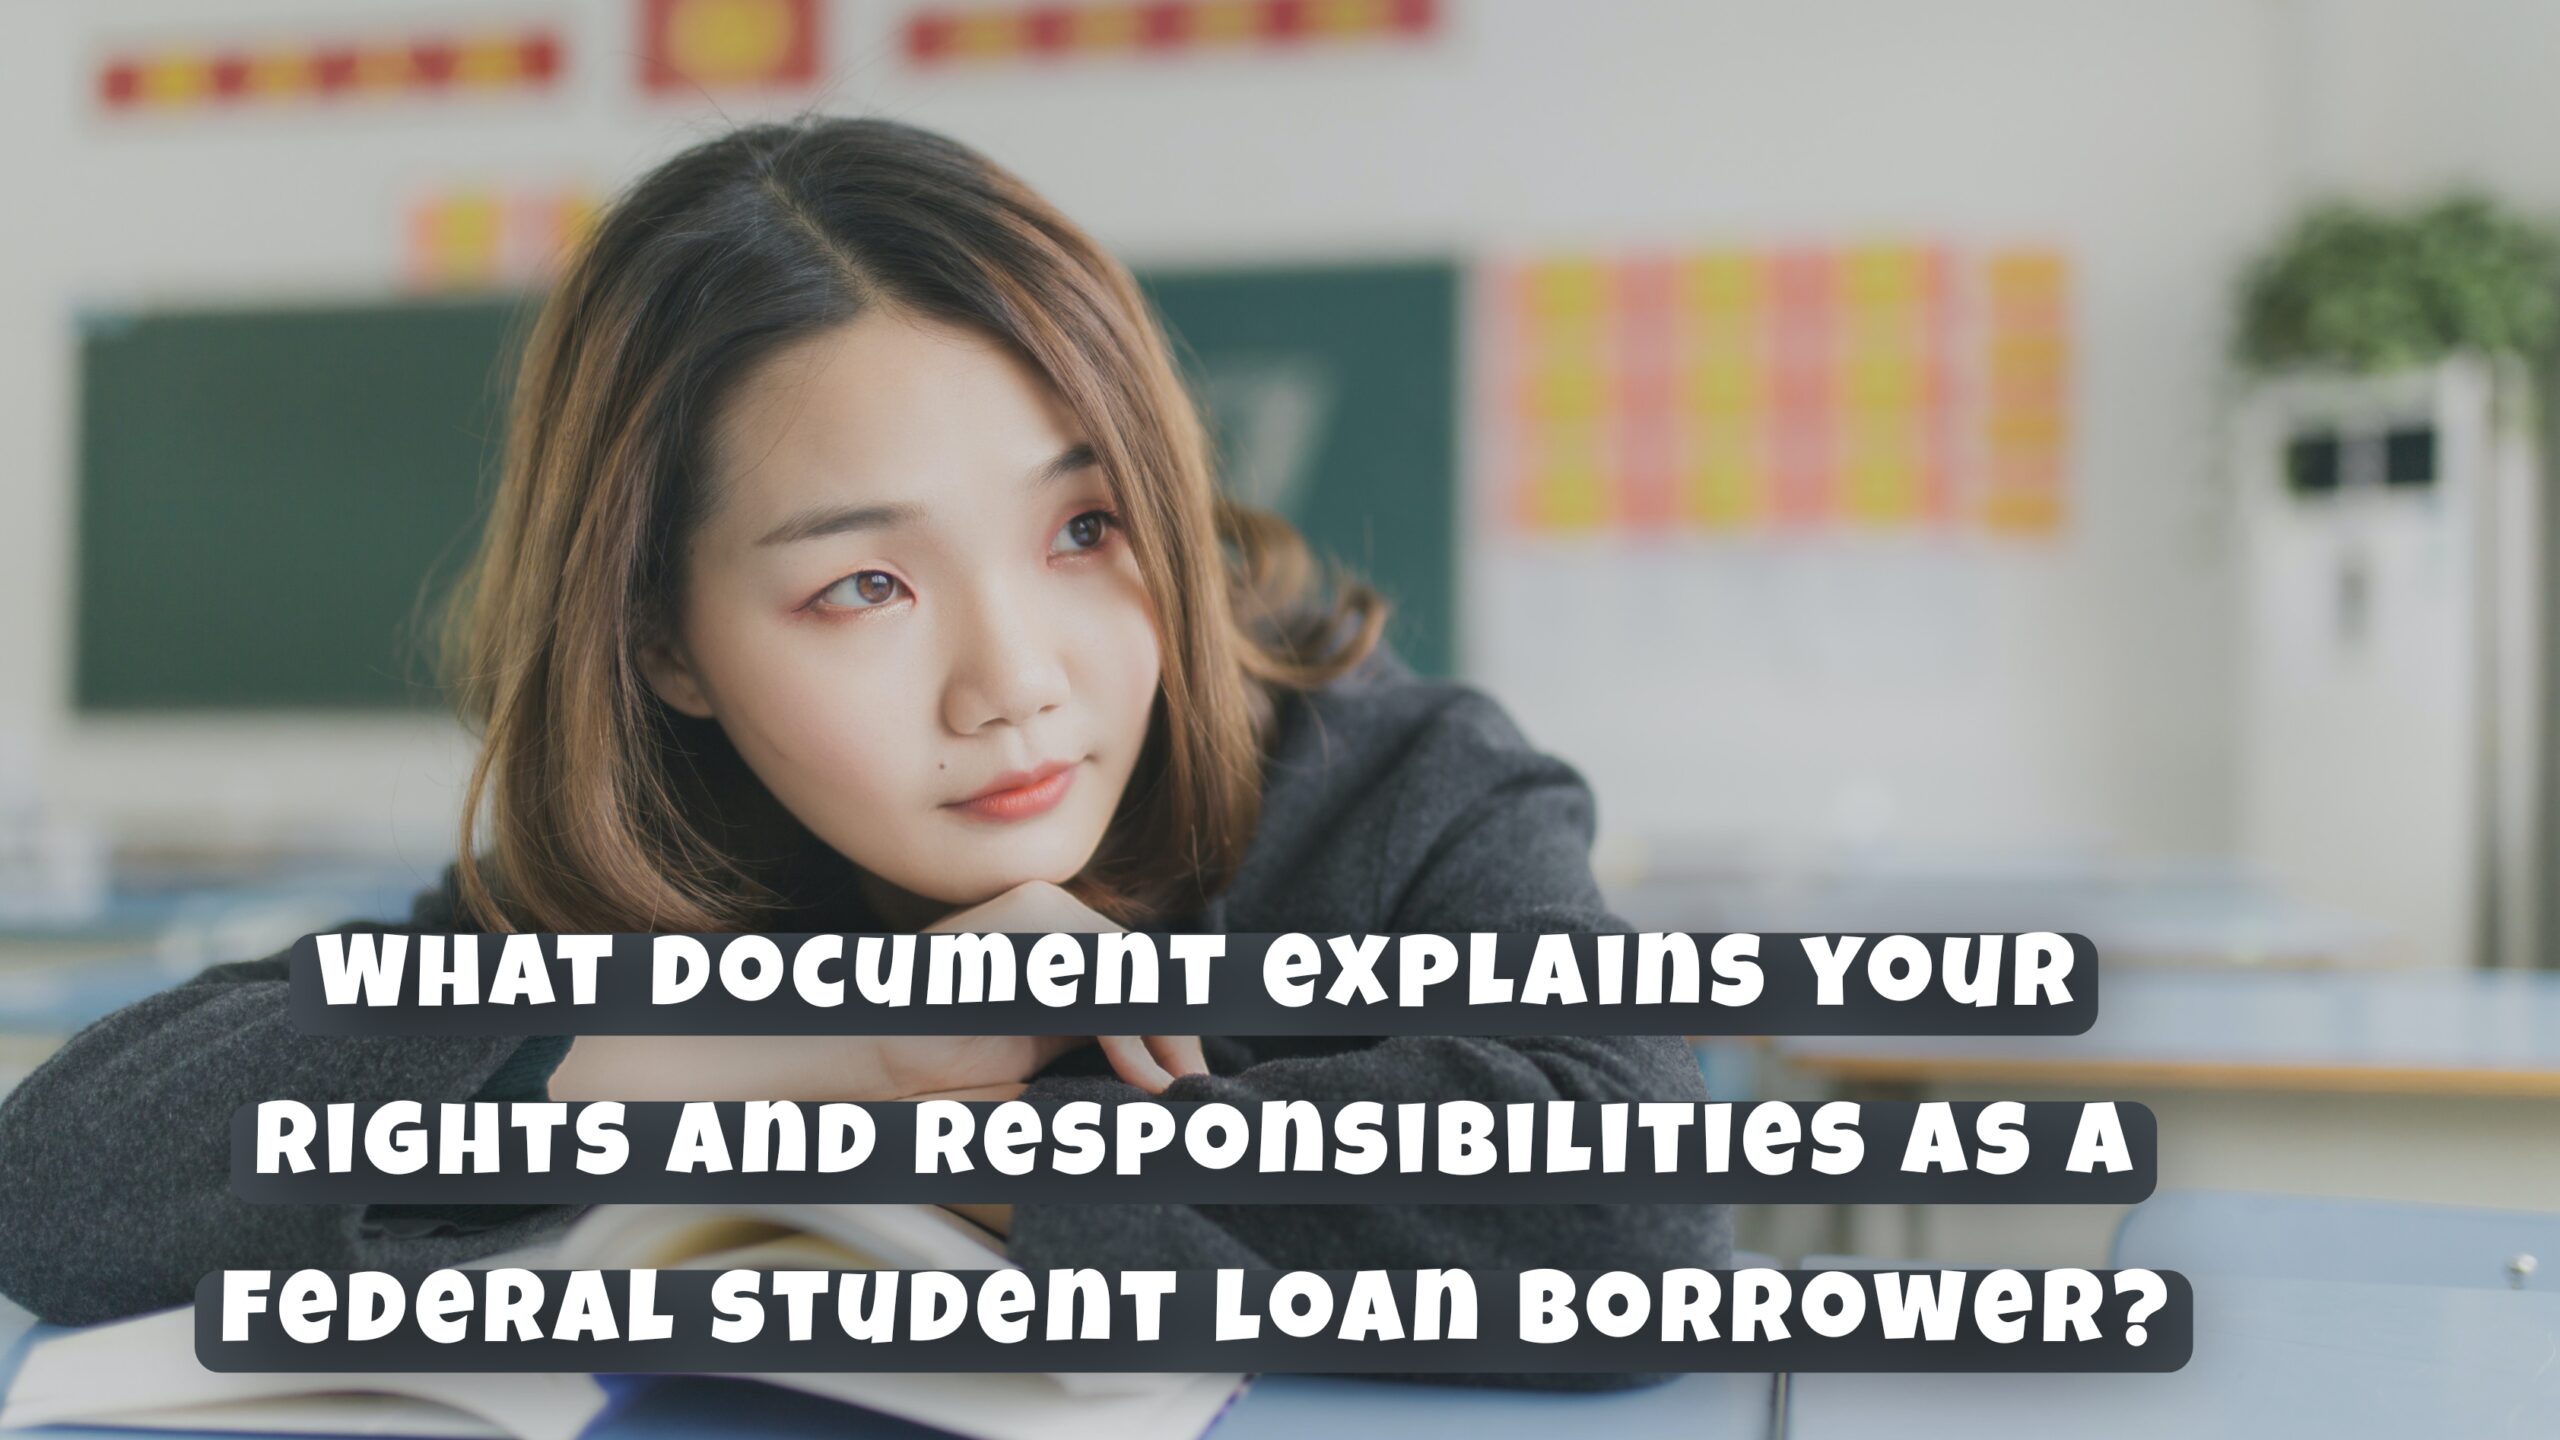 what document explains your rights and responsibilities as a federal student loan borrower?